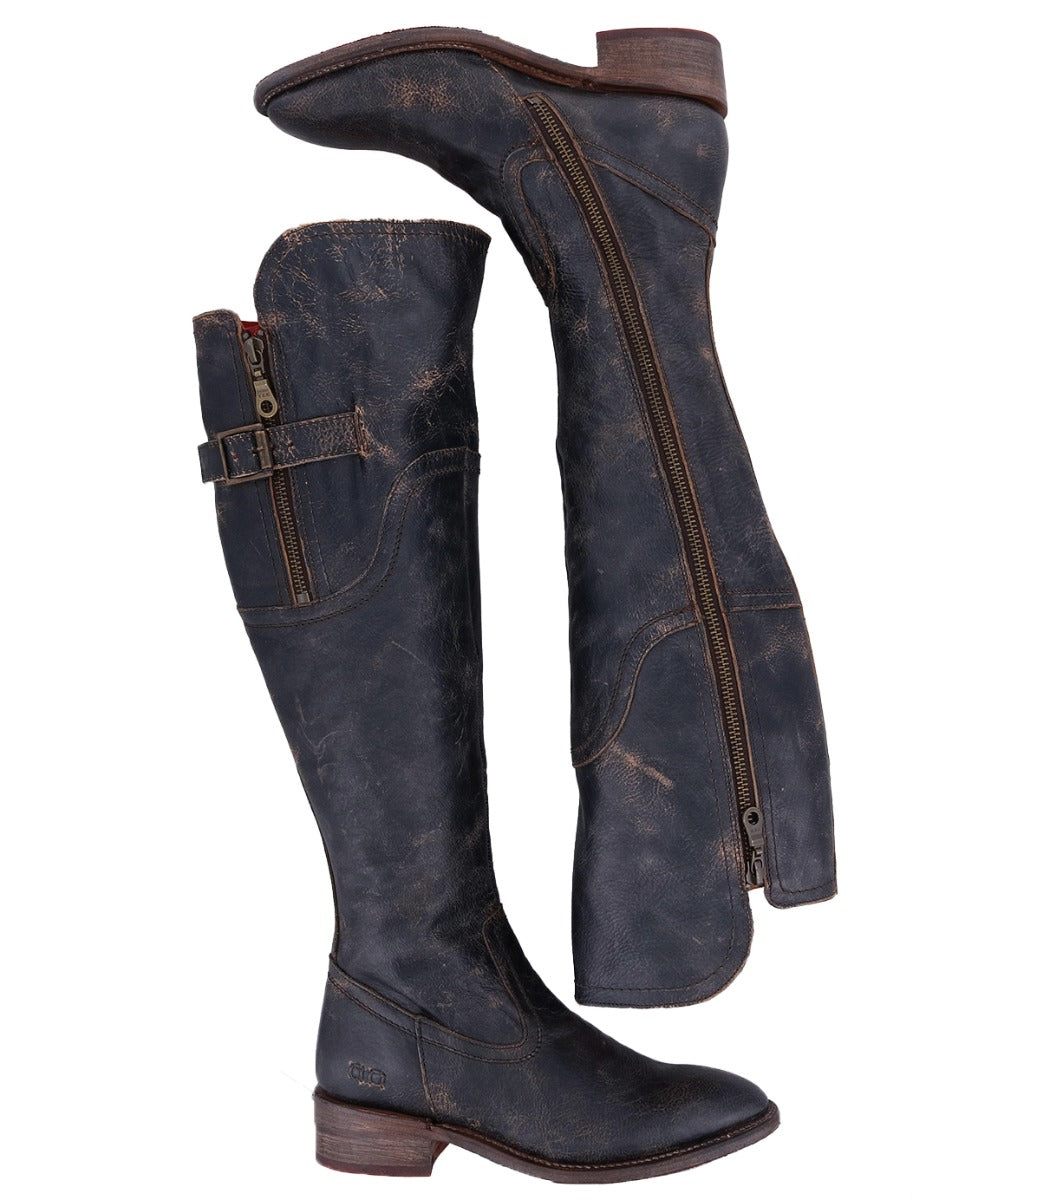 A pair of Kathleen women's boots with buckles and zippers by Bed Stu.